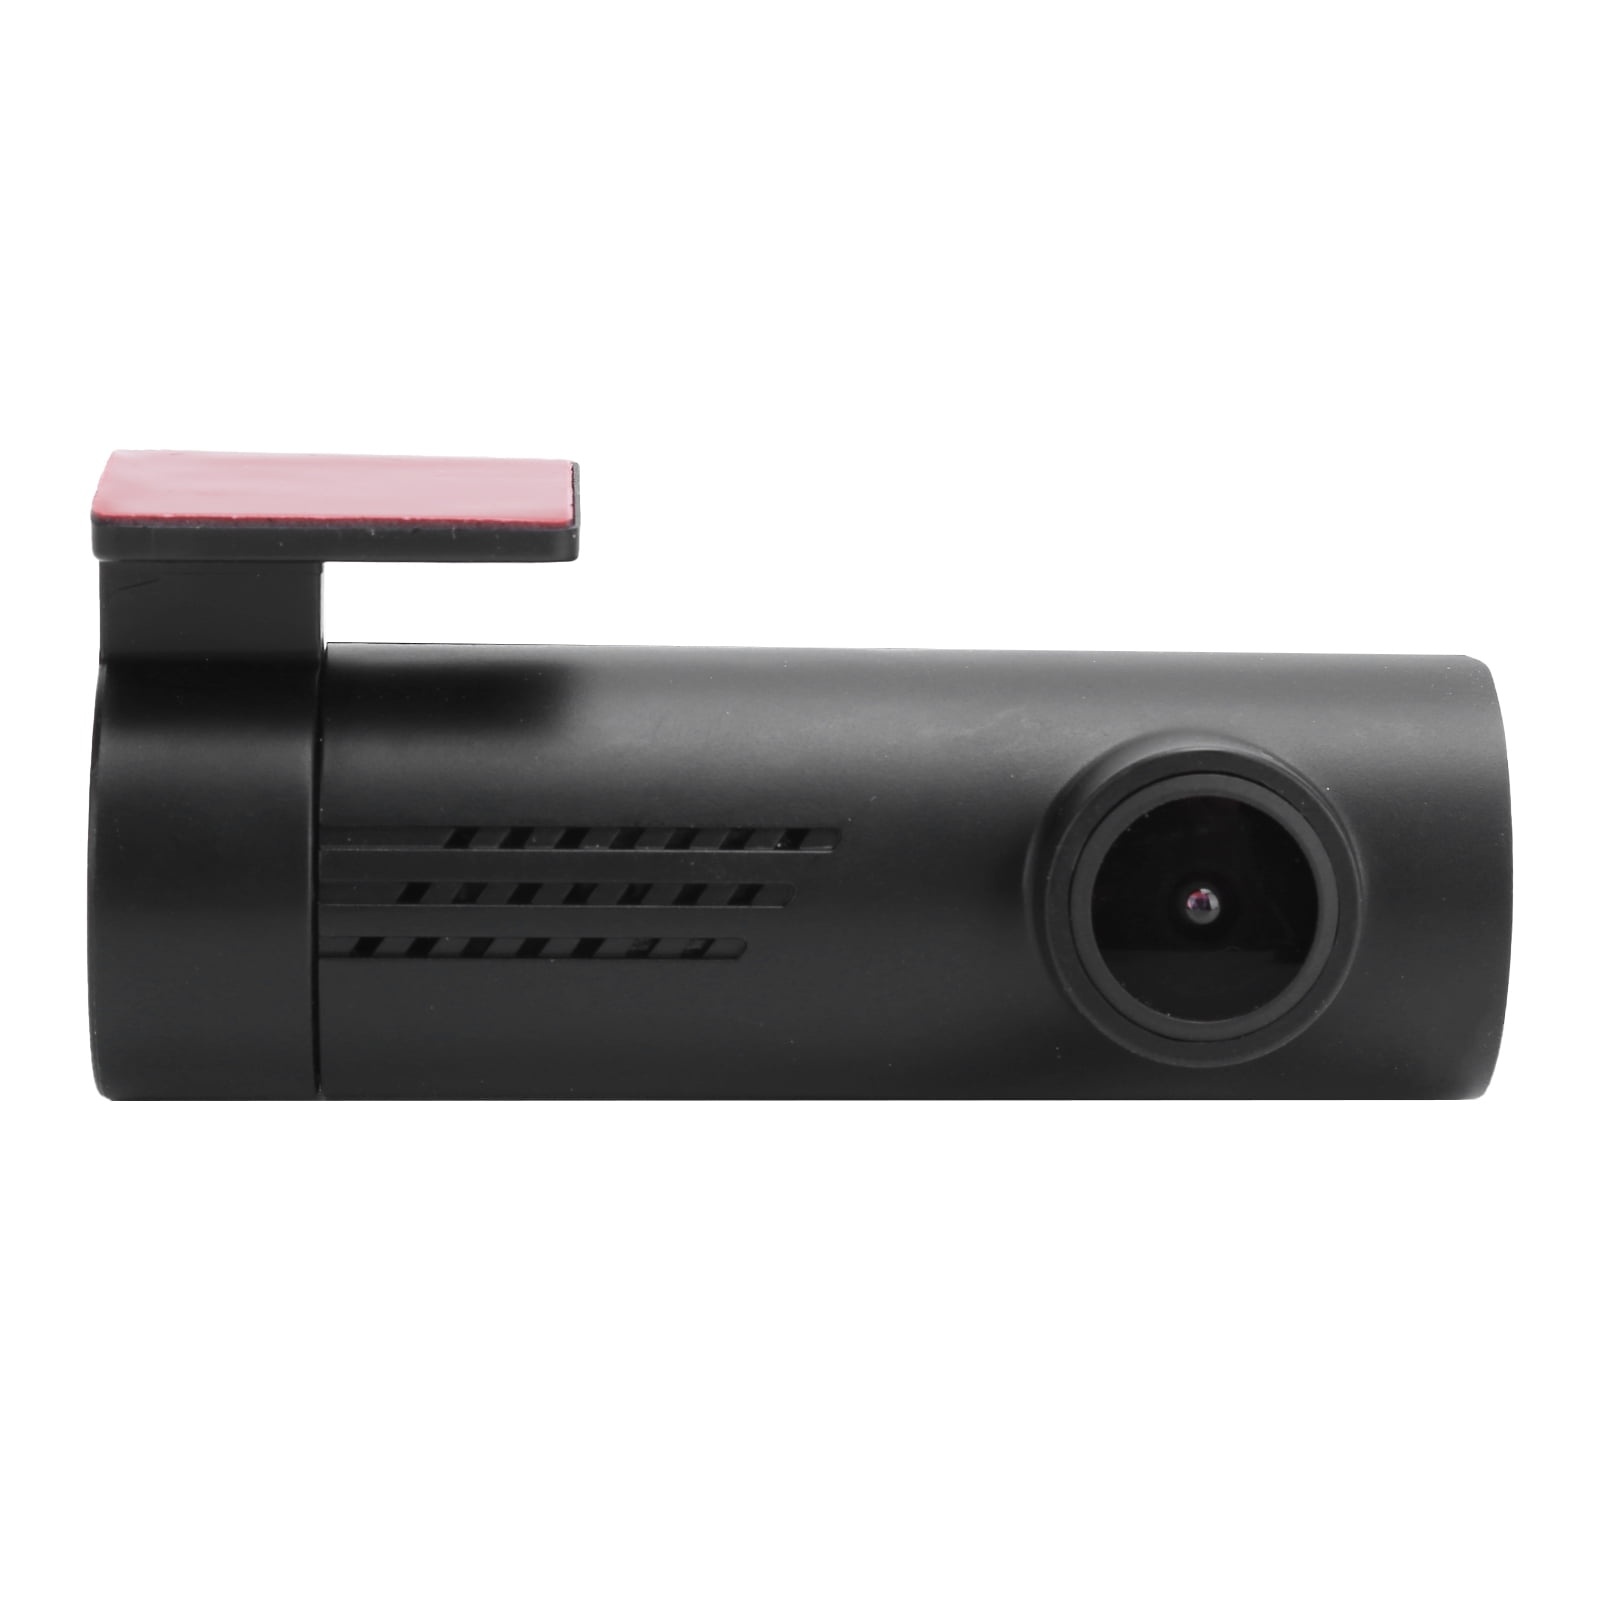 1080P Hidden Dash Camera Recorder Wide Angle WiFi Stealth Dash Cams for Vehicles